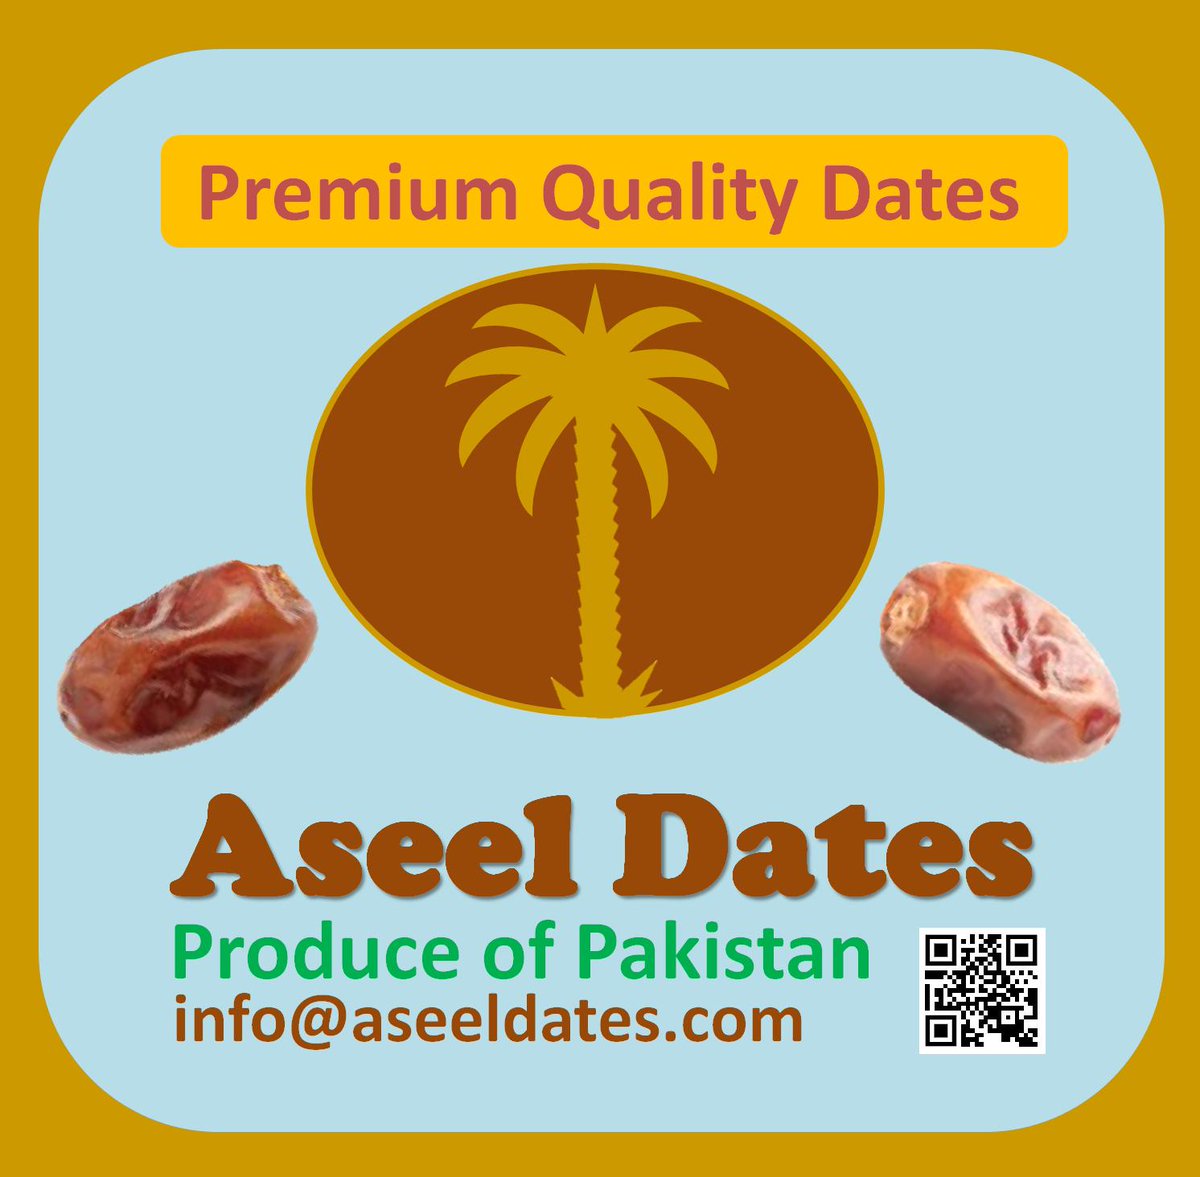 Discover the best quality dates at unbeatable price. We have opened the booking of crop 2019 for our esteemed customers. Stock of Pitted Dates, Chopped Dates, Diced Dates, Date Paste is ready for shipment.